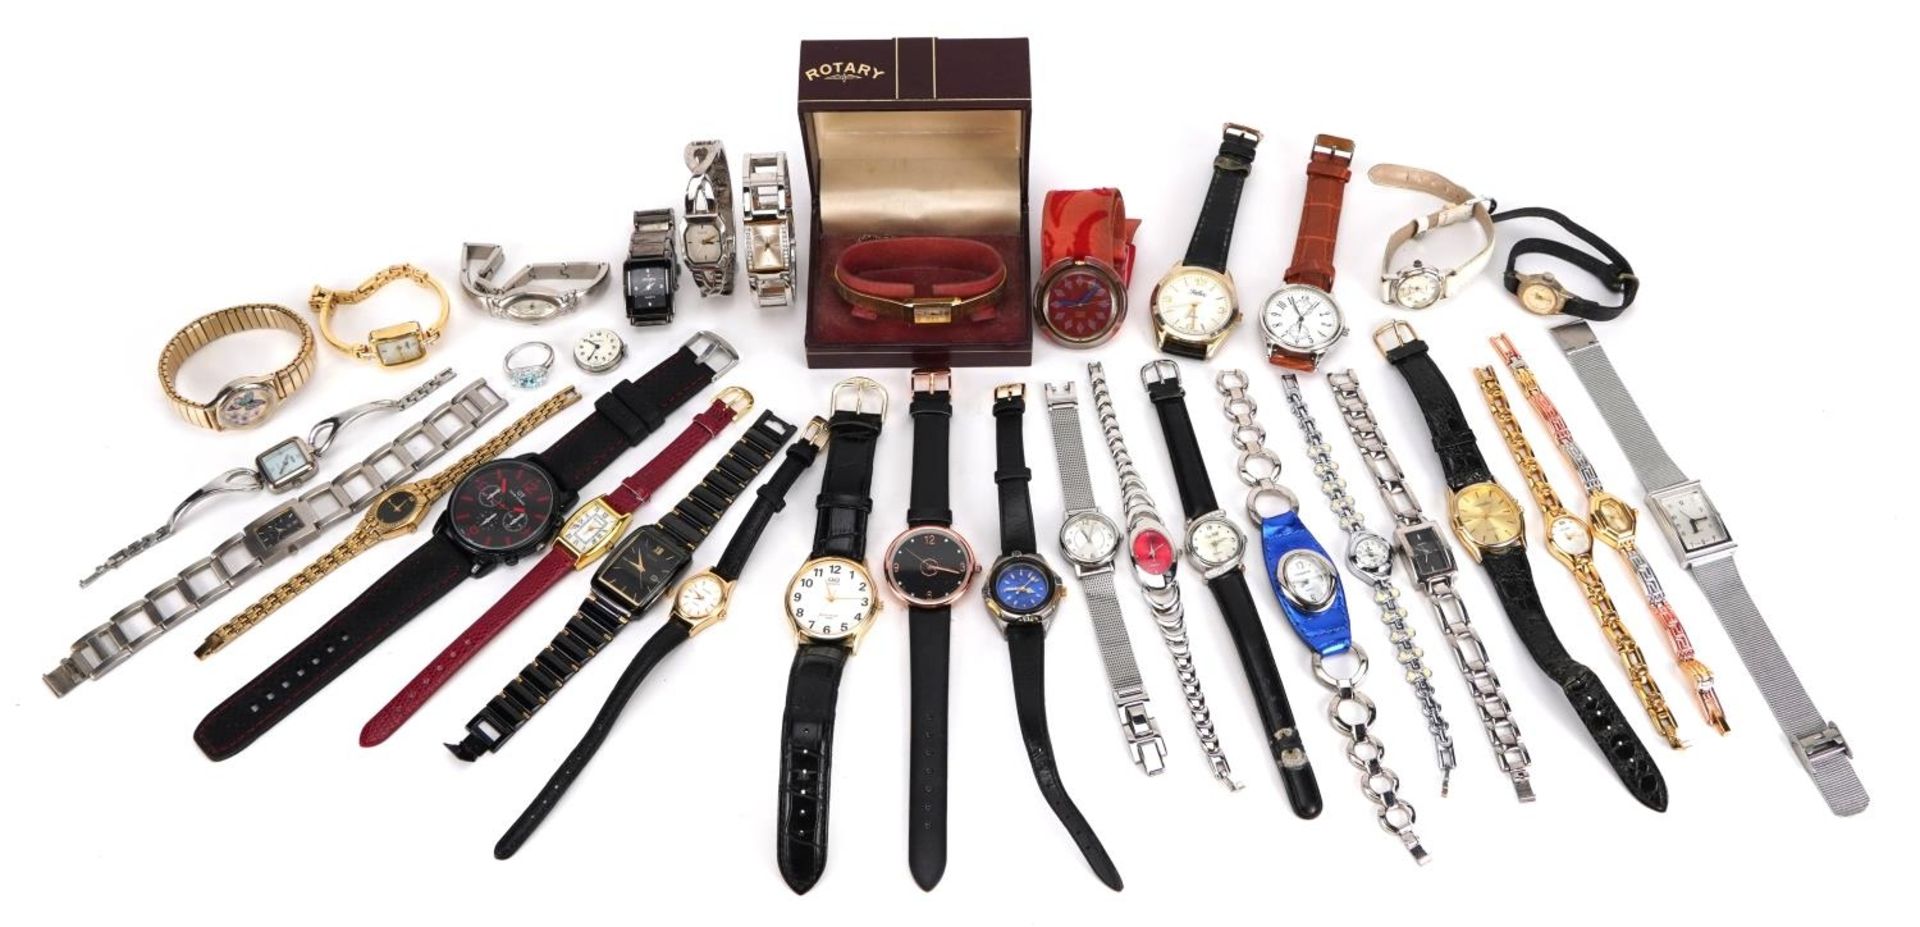 Ladies and gentlemen's wristwatches including Rotary